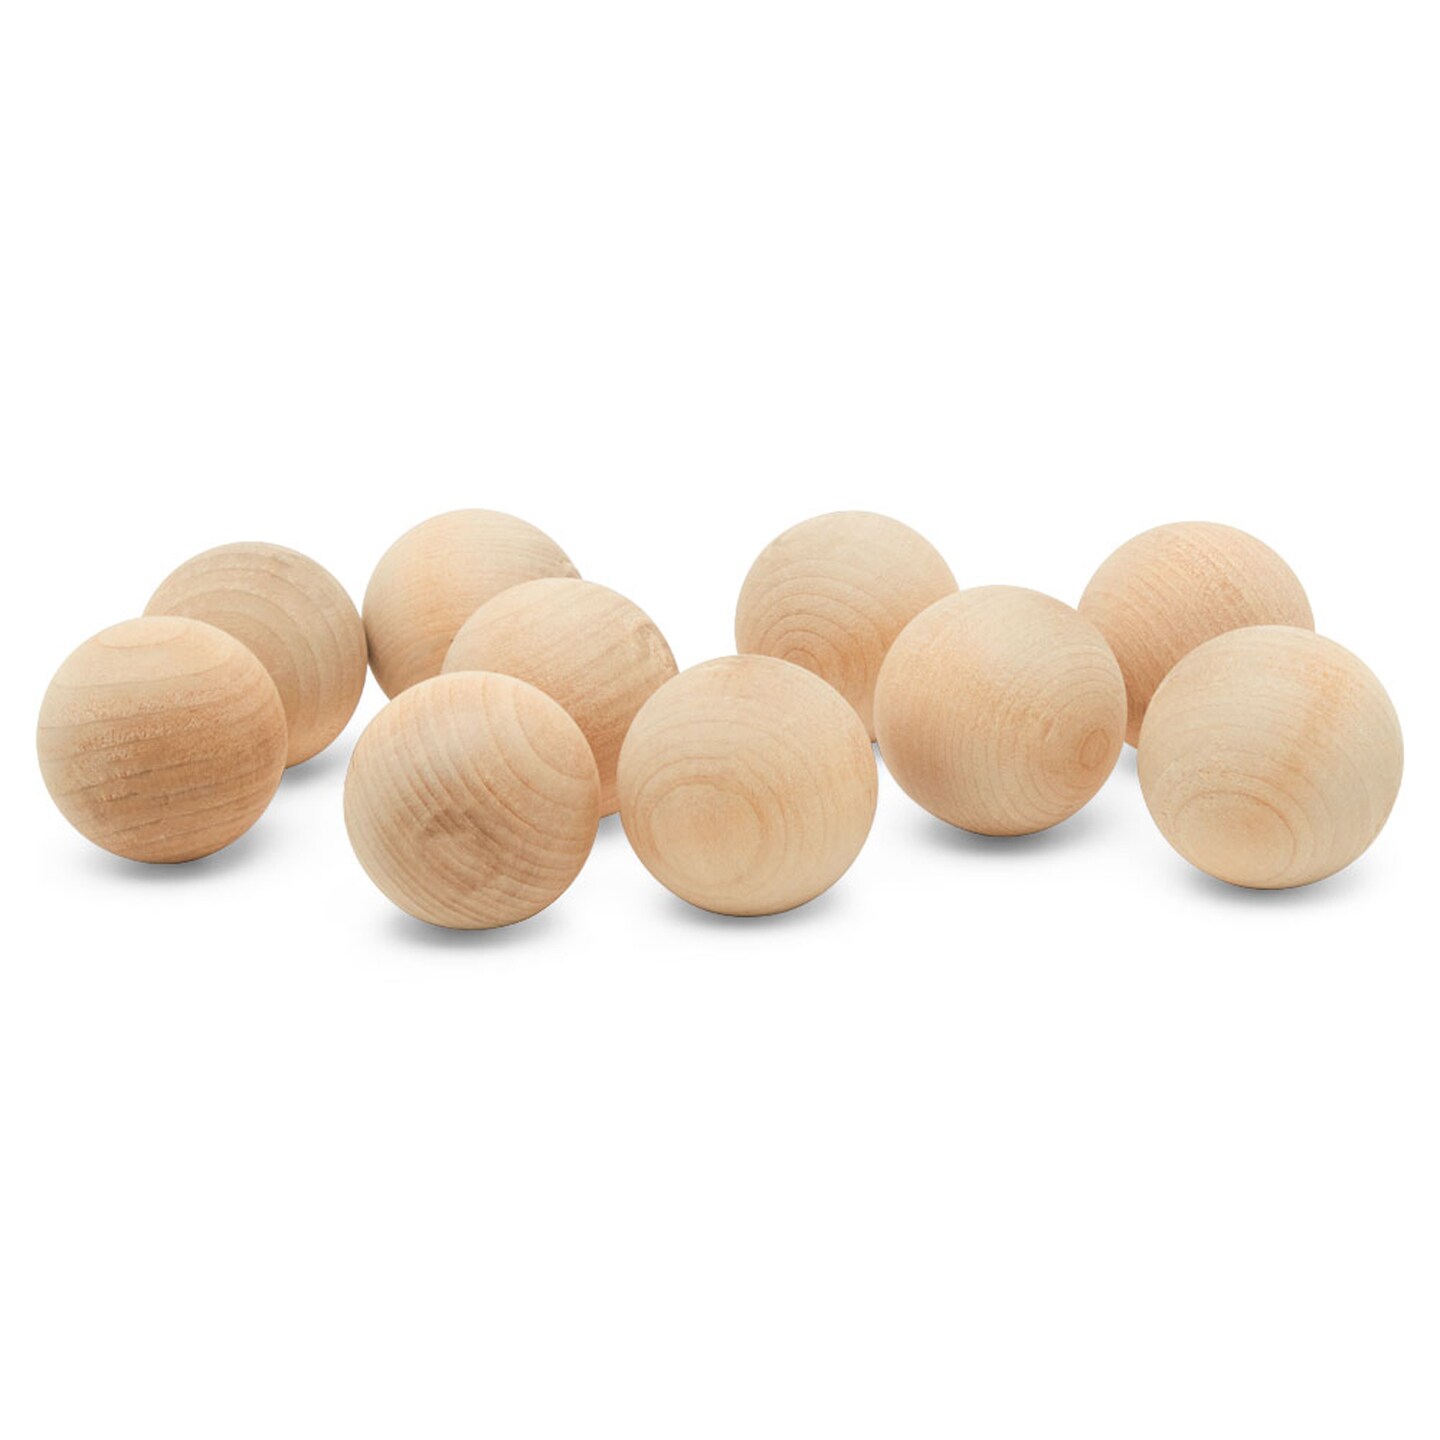 5ct Woodpeckers Crafts, DIY Unfinished Wood 3 Ball, Pack of 5 Natural